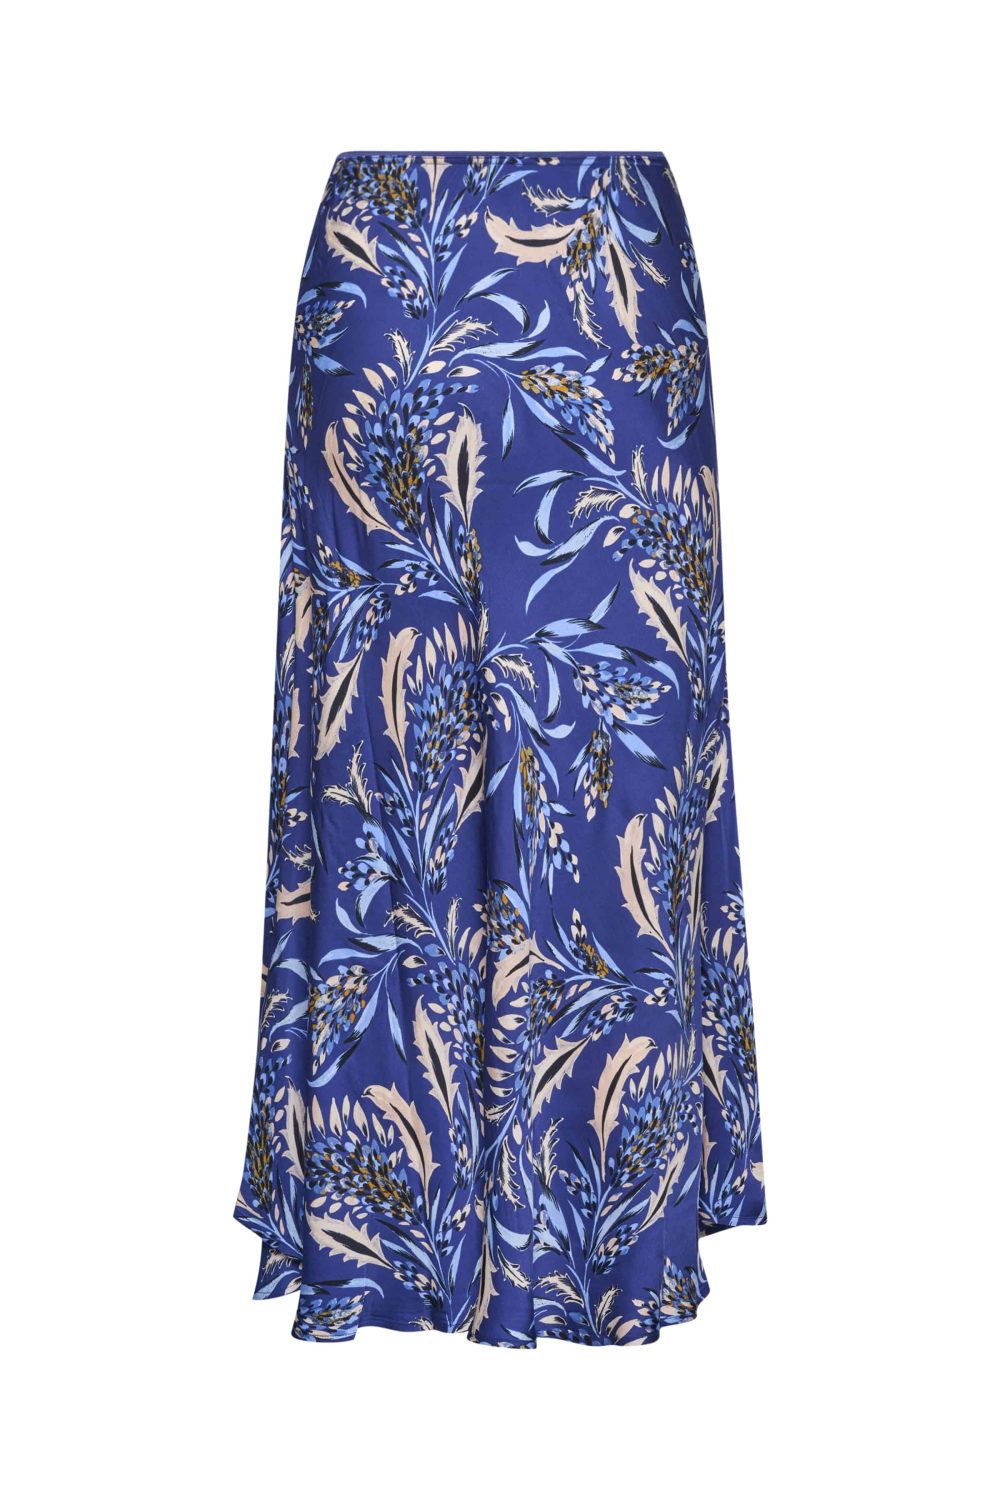 Blue Floral Print Skirt - Laurie & Jules